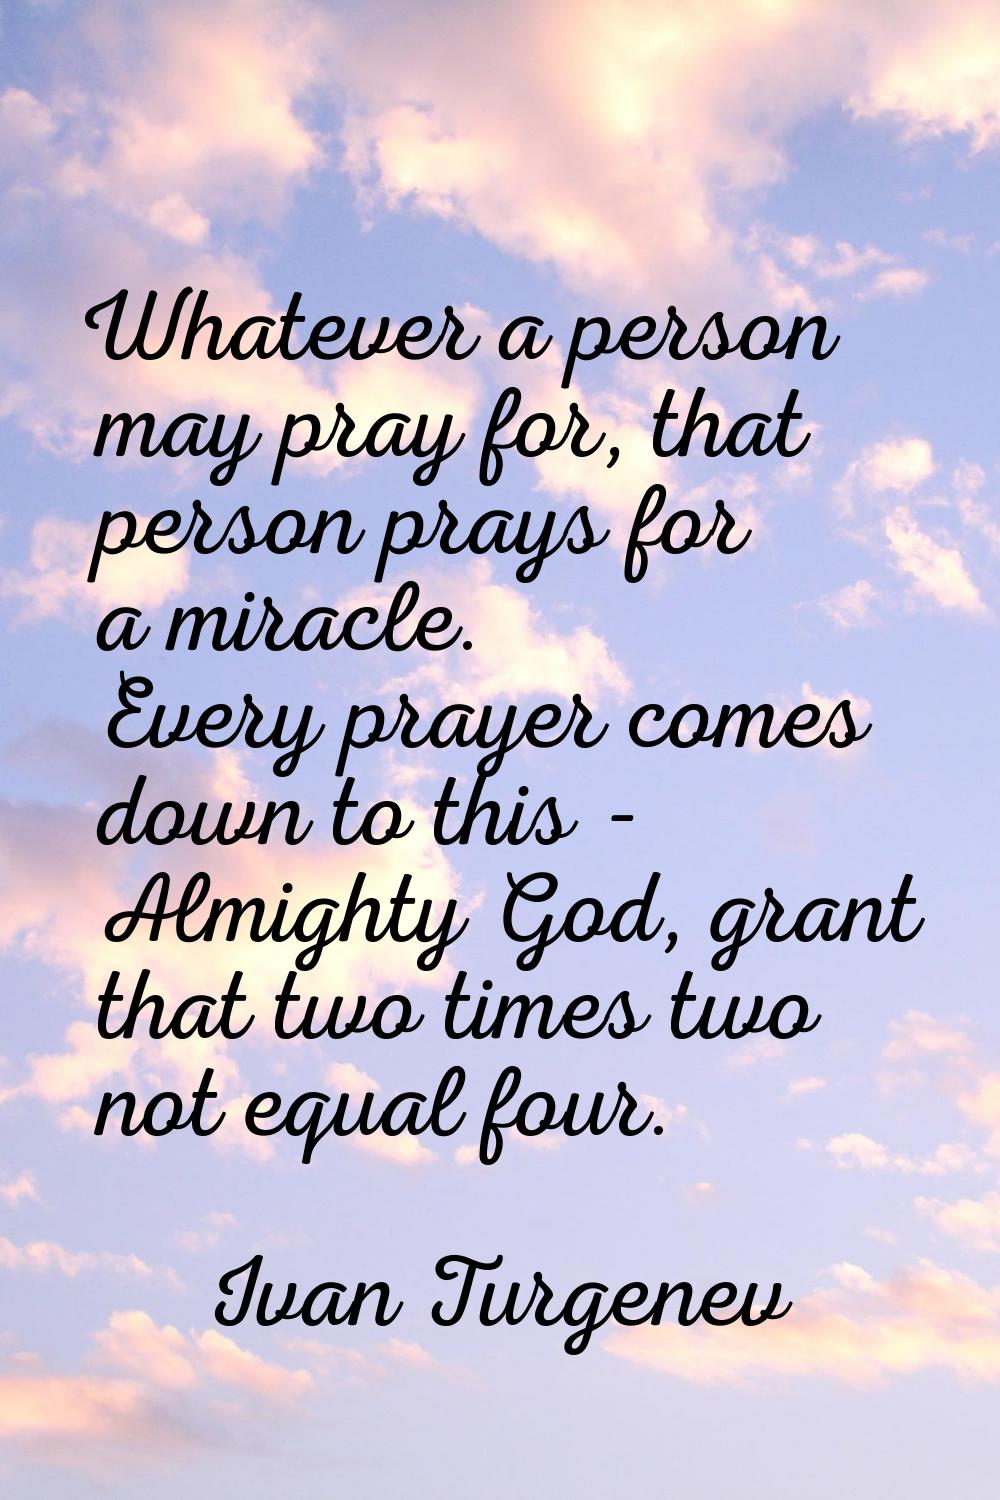 Whatever a person may pray for, that person prays for a miracle. Every prayer comes down to this - 